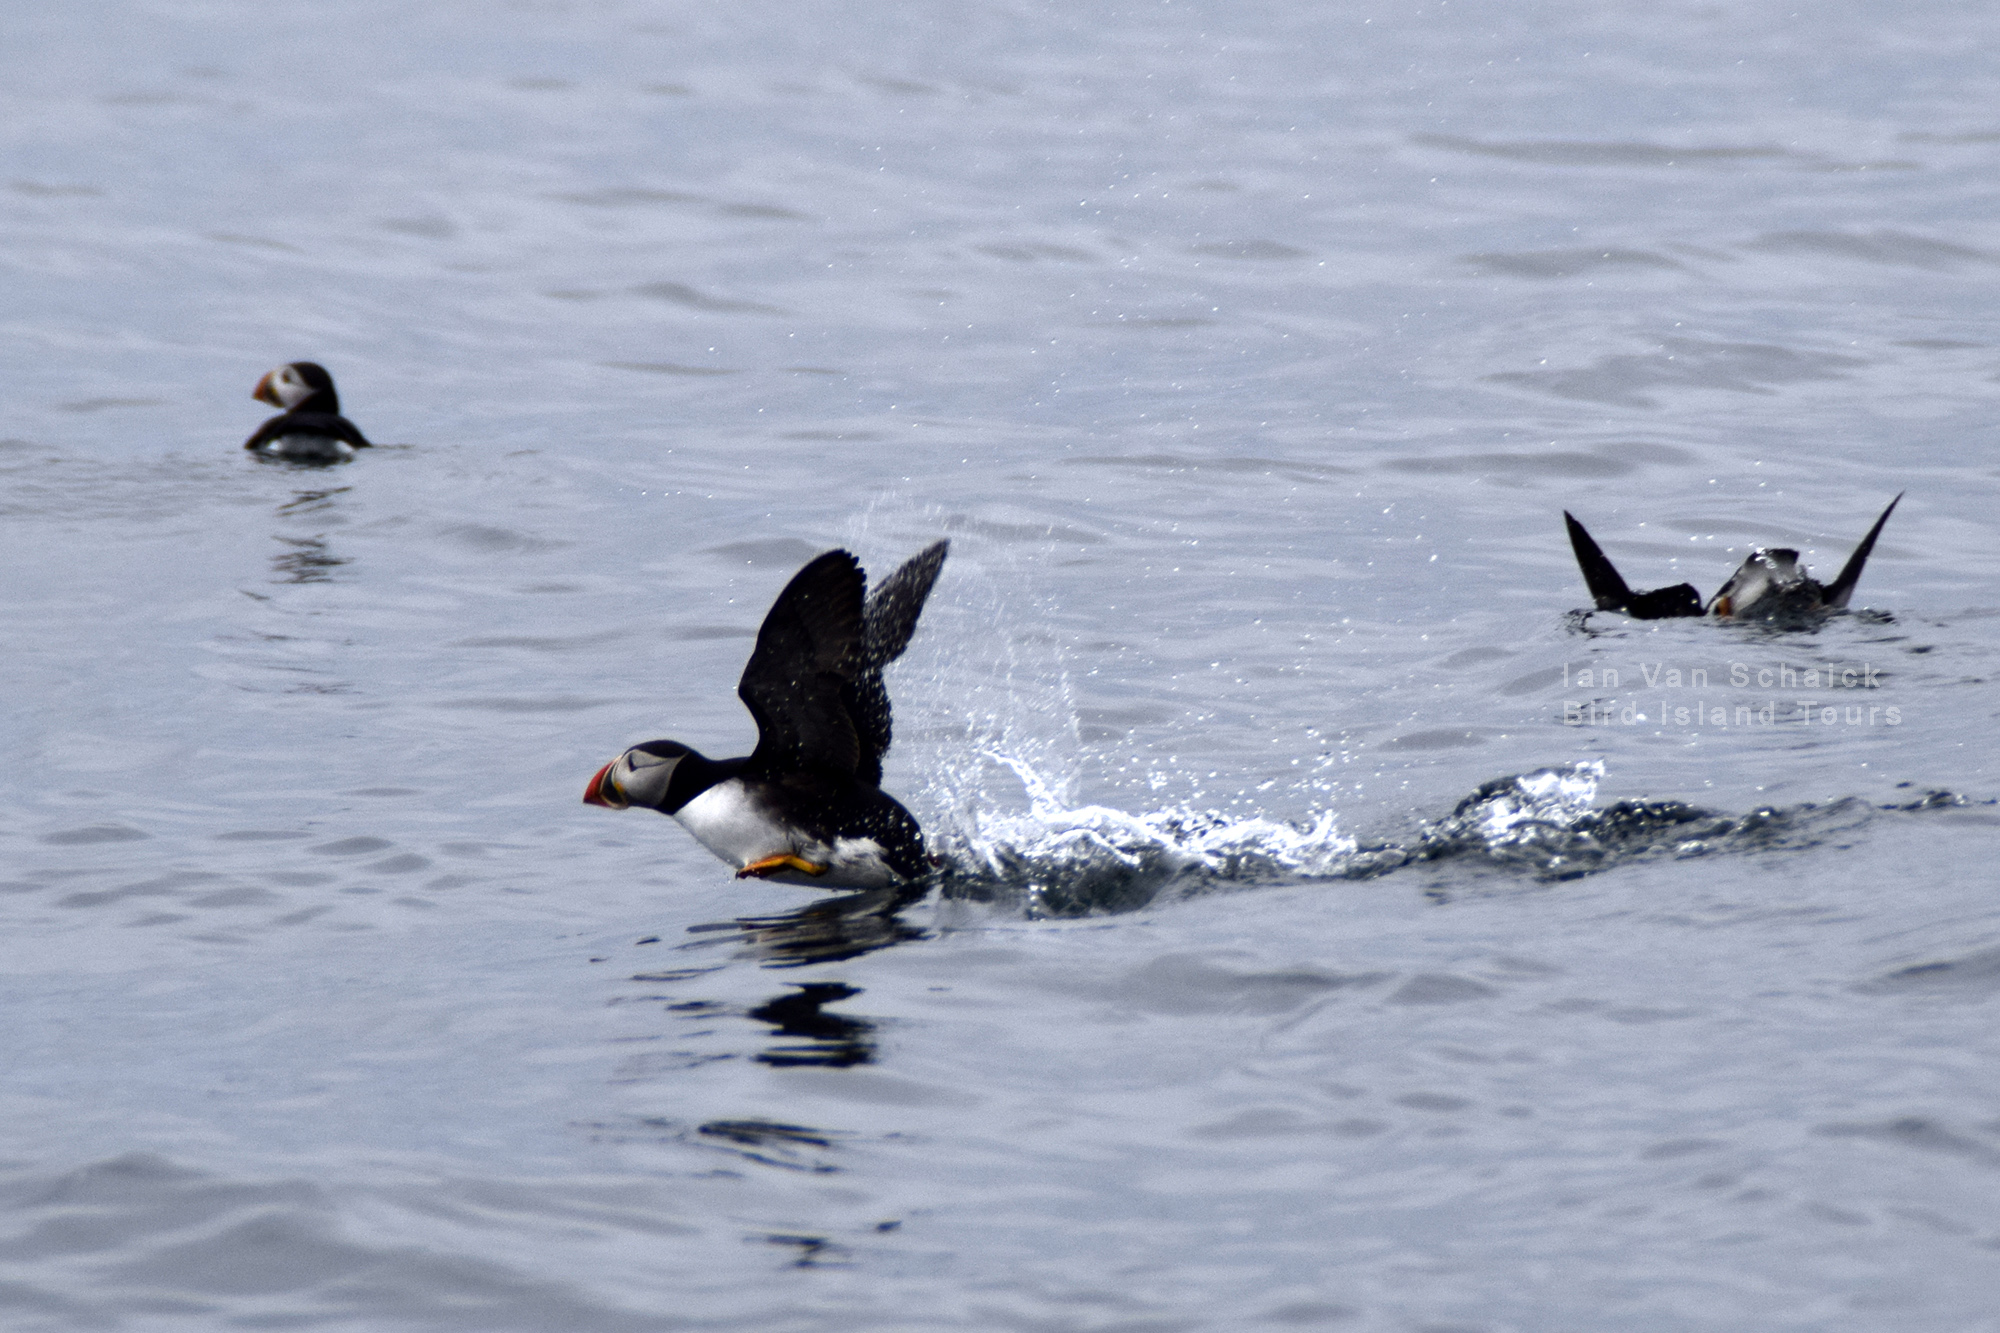 A Puffin taking off